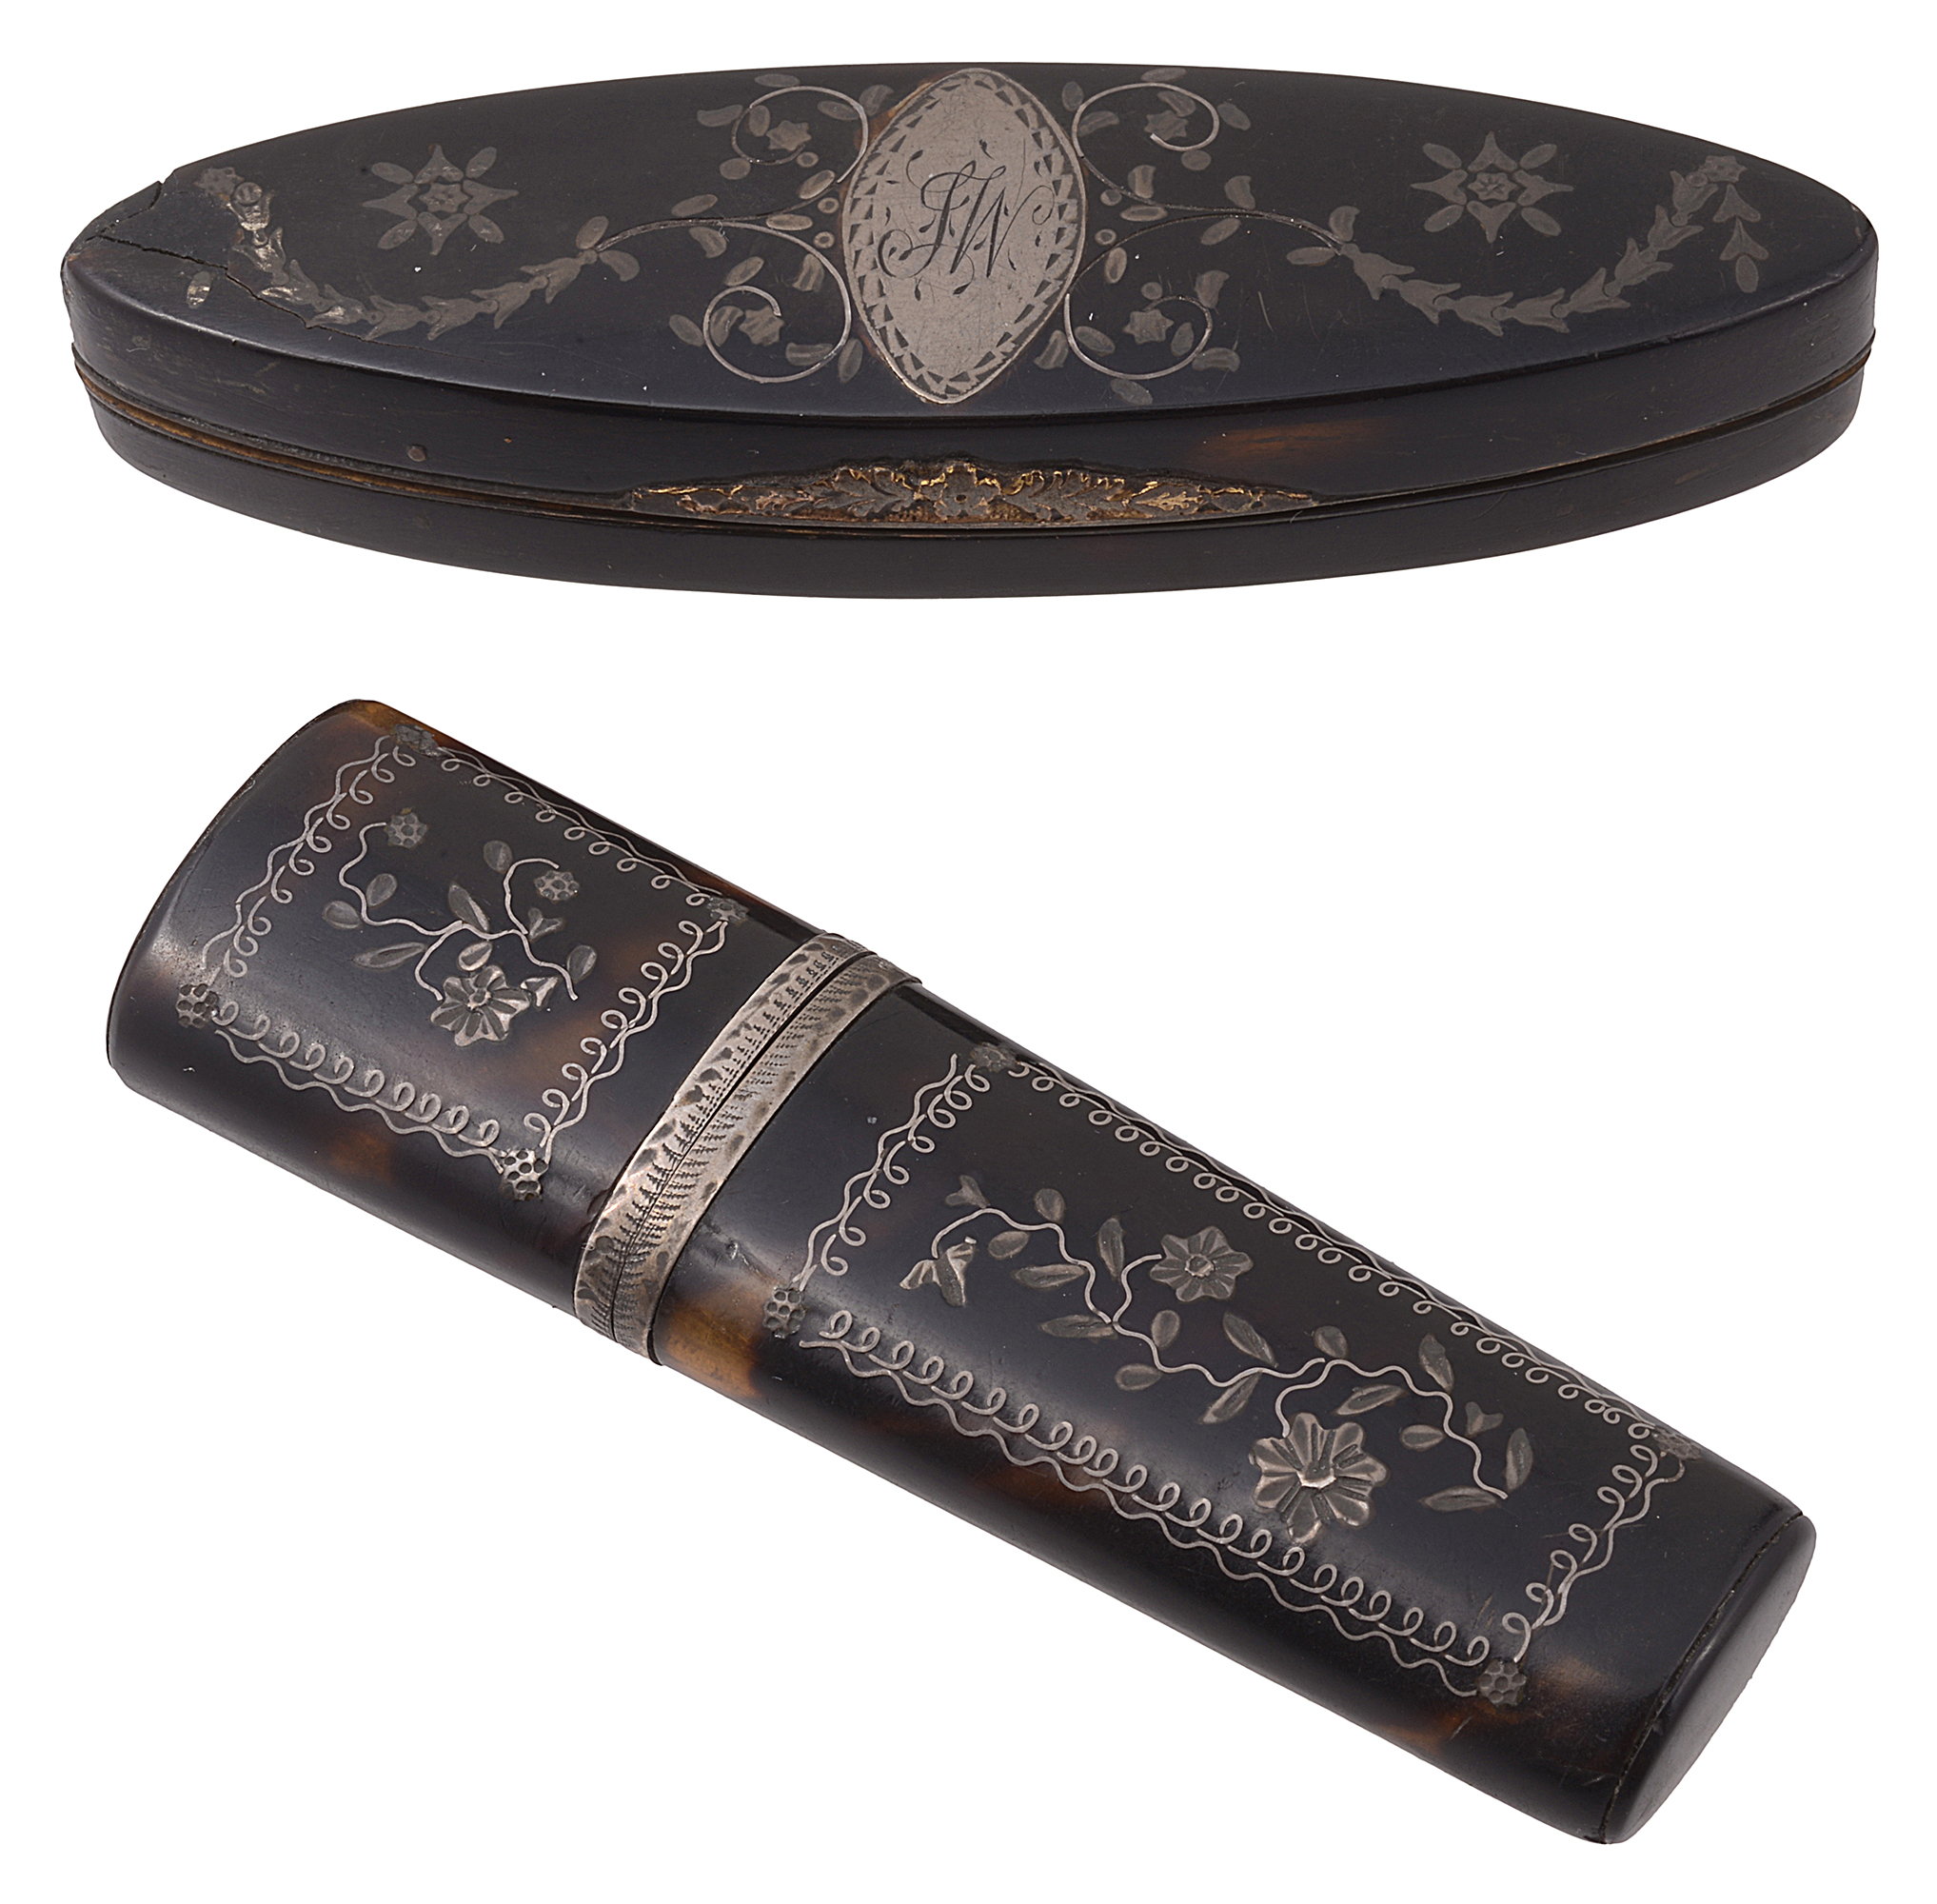 George III tortoiseshell and silver pique inlaid toothpick case c.1790 and a needle case